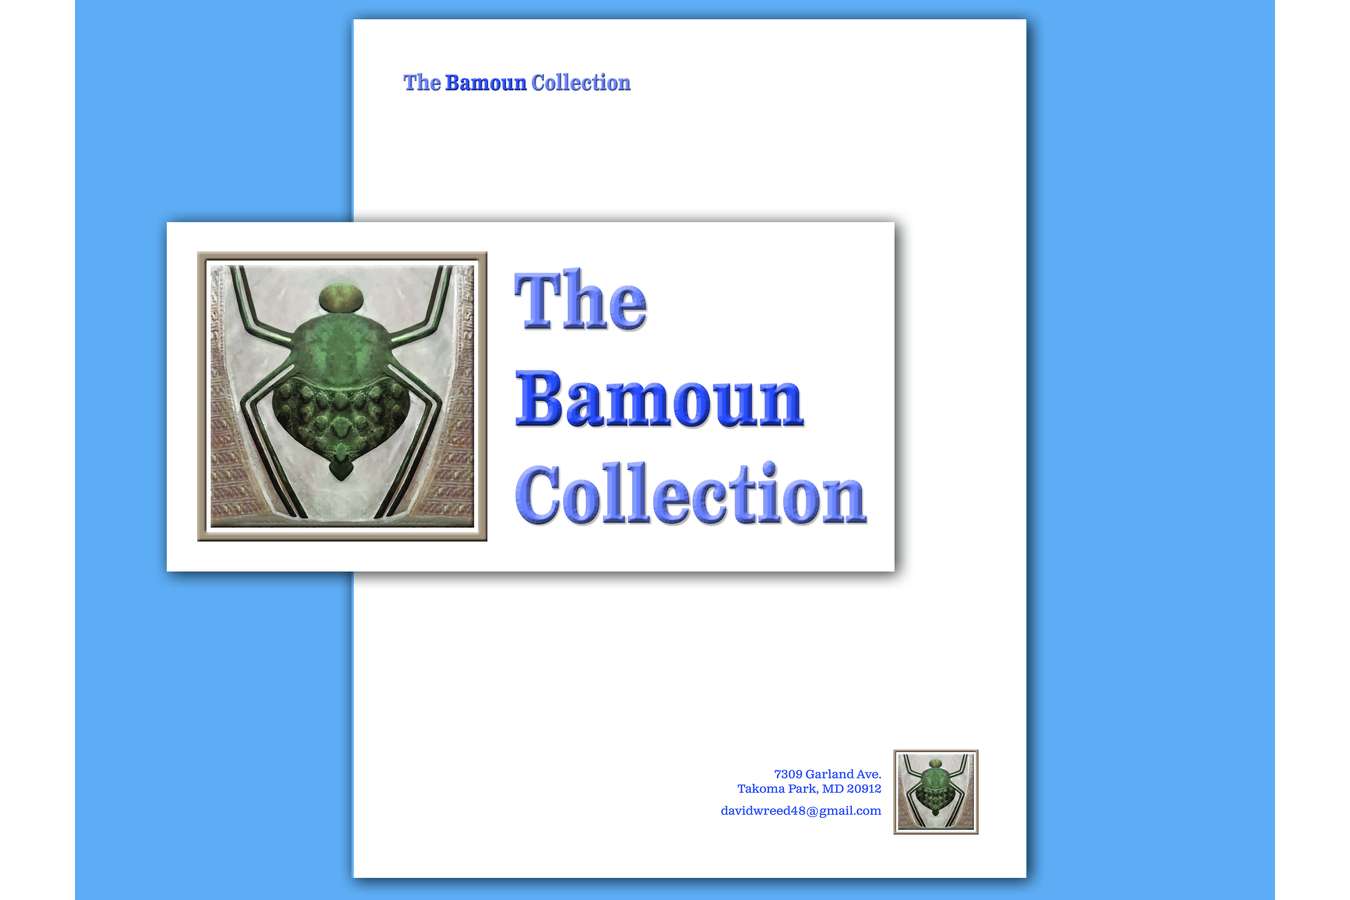 2018 Bamoun LTRHead Collection : Developed Museum Logo, Branding, and Graphic Templates for the Organization